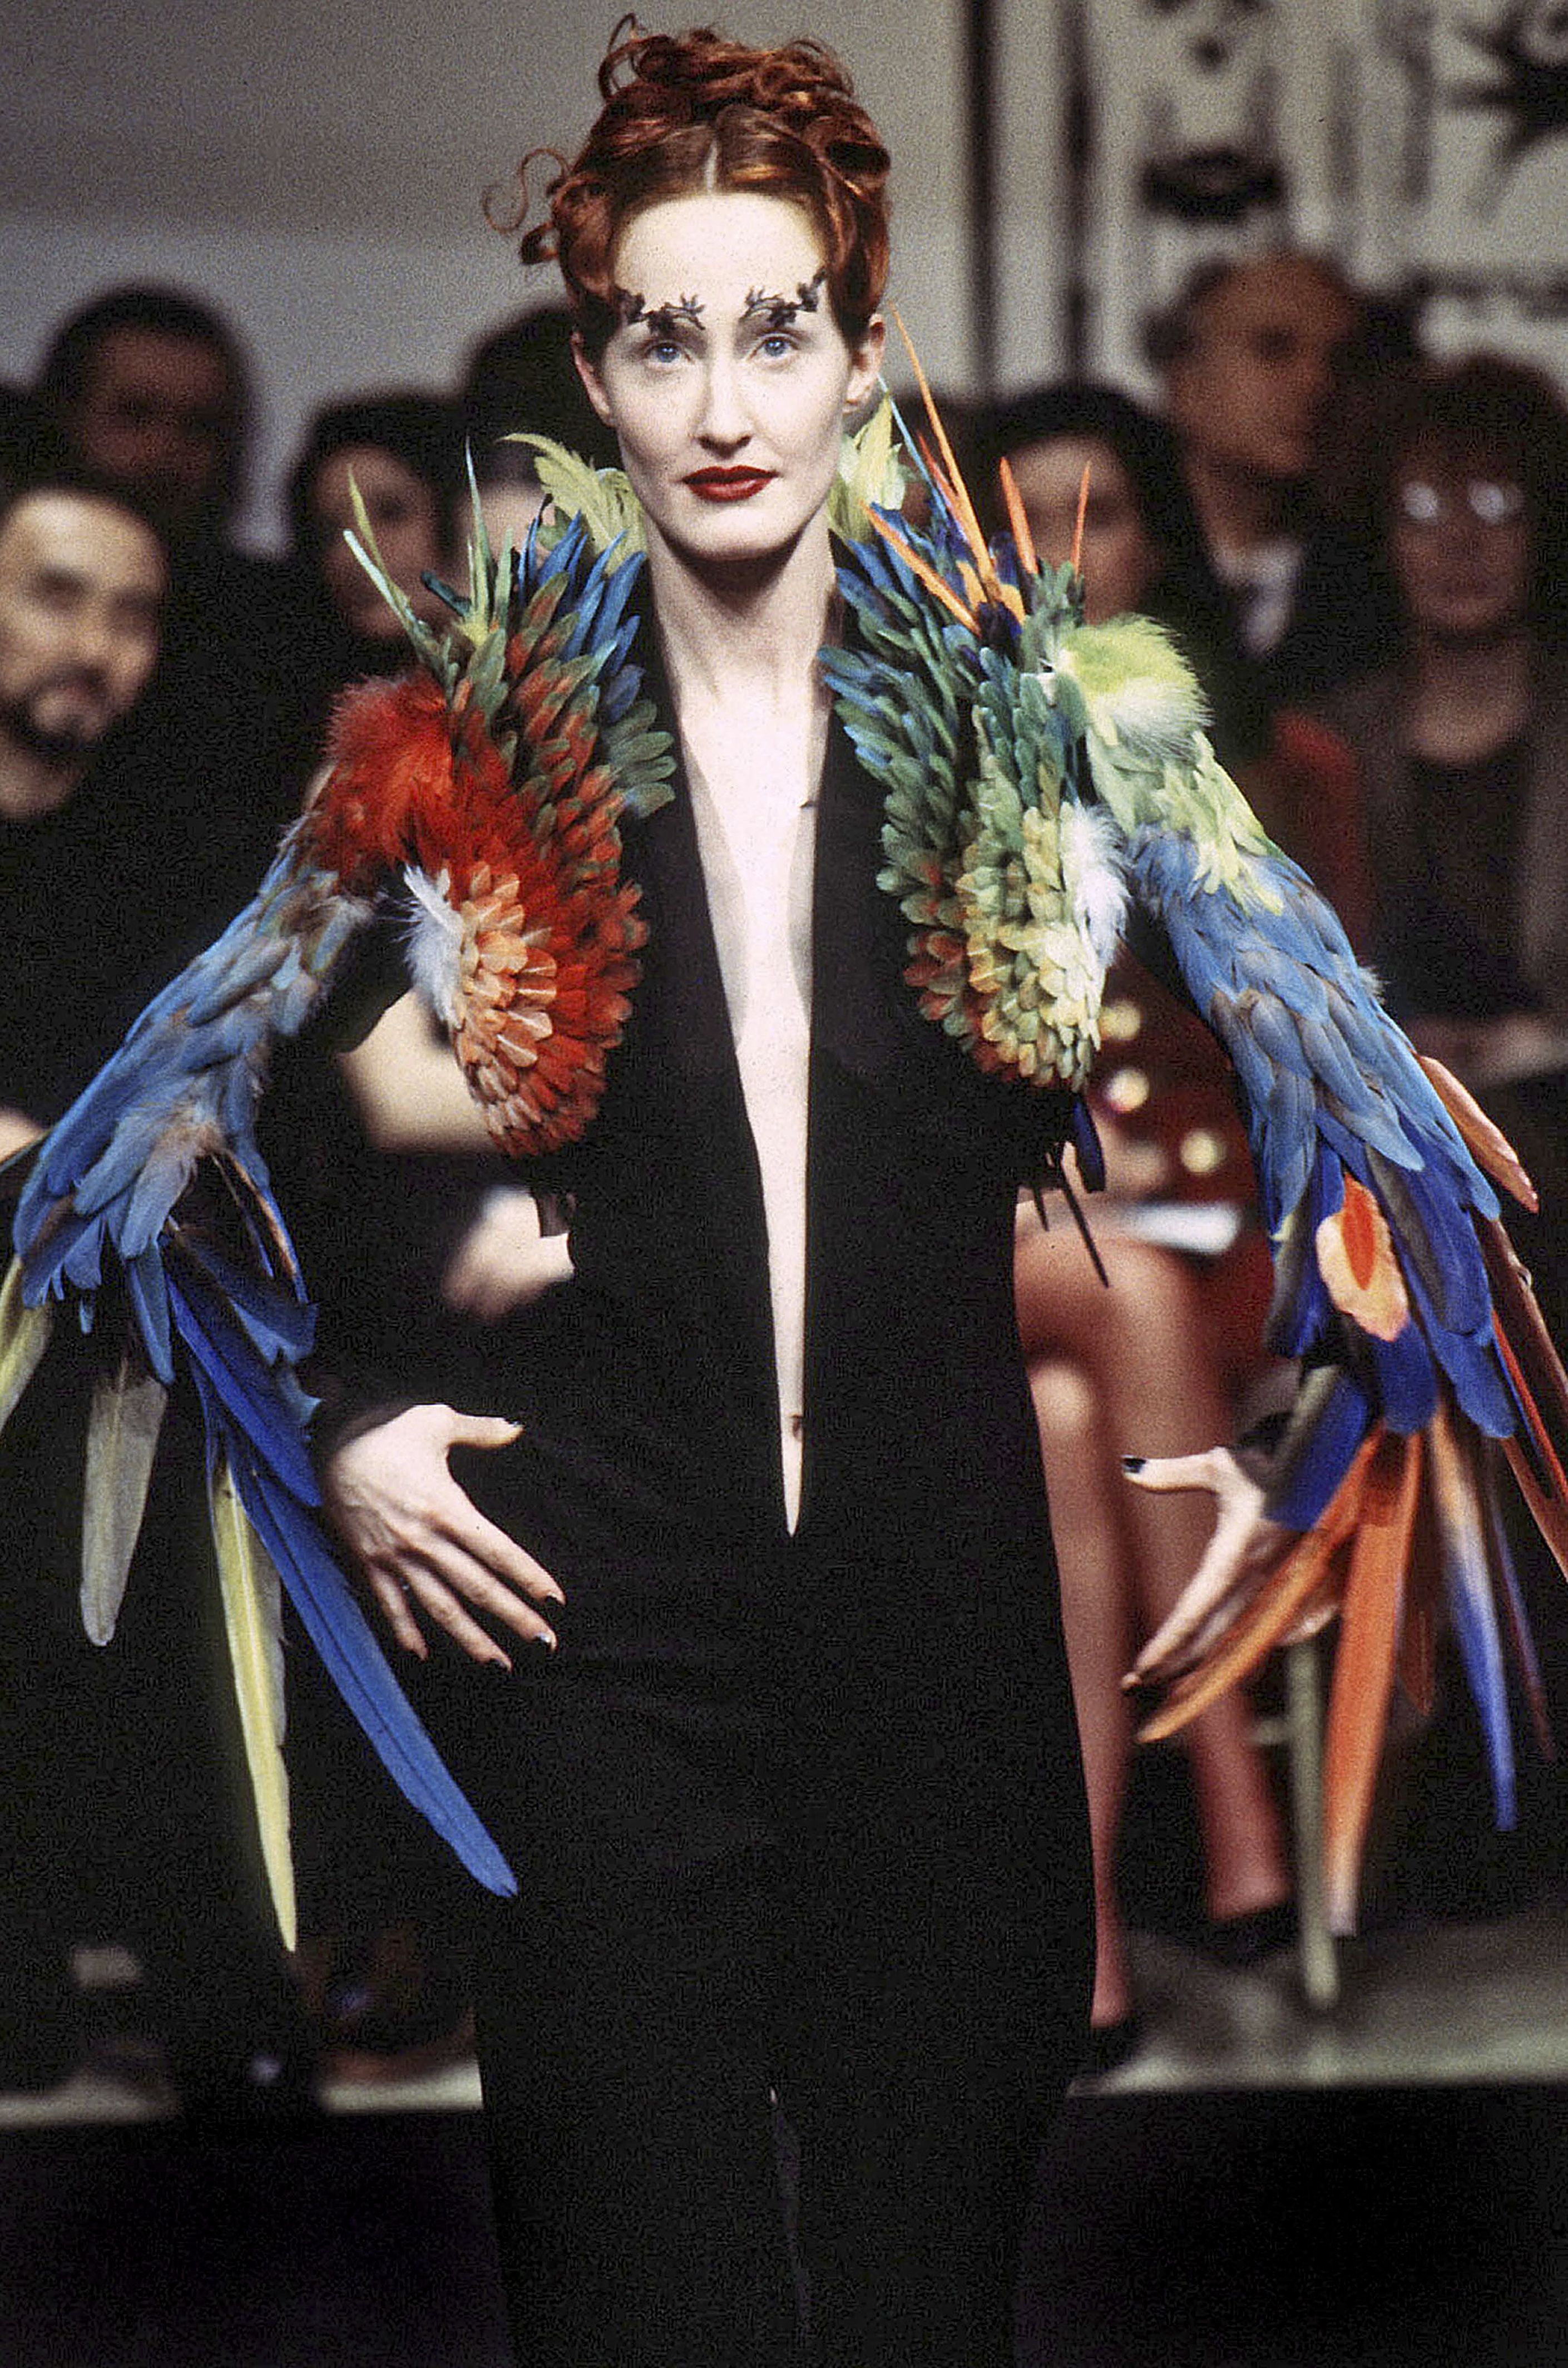 Exclusive: Inside Haider Ackermann's Gaultier couture debut